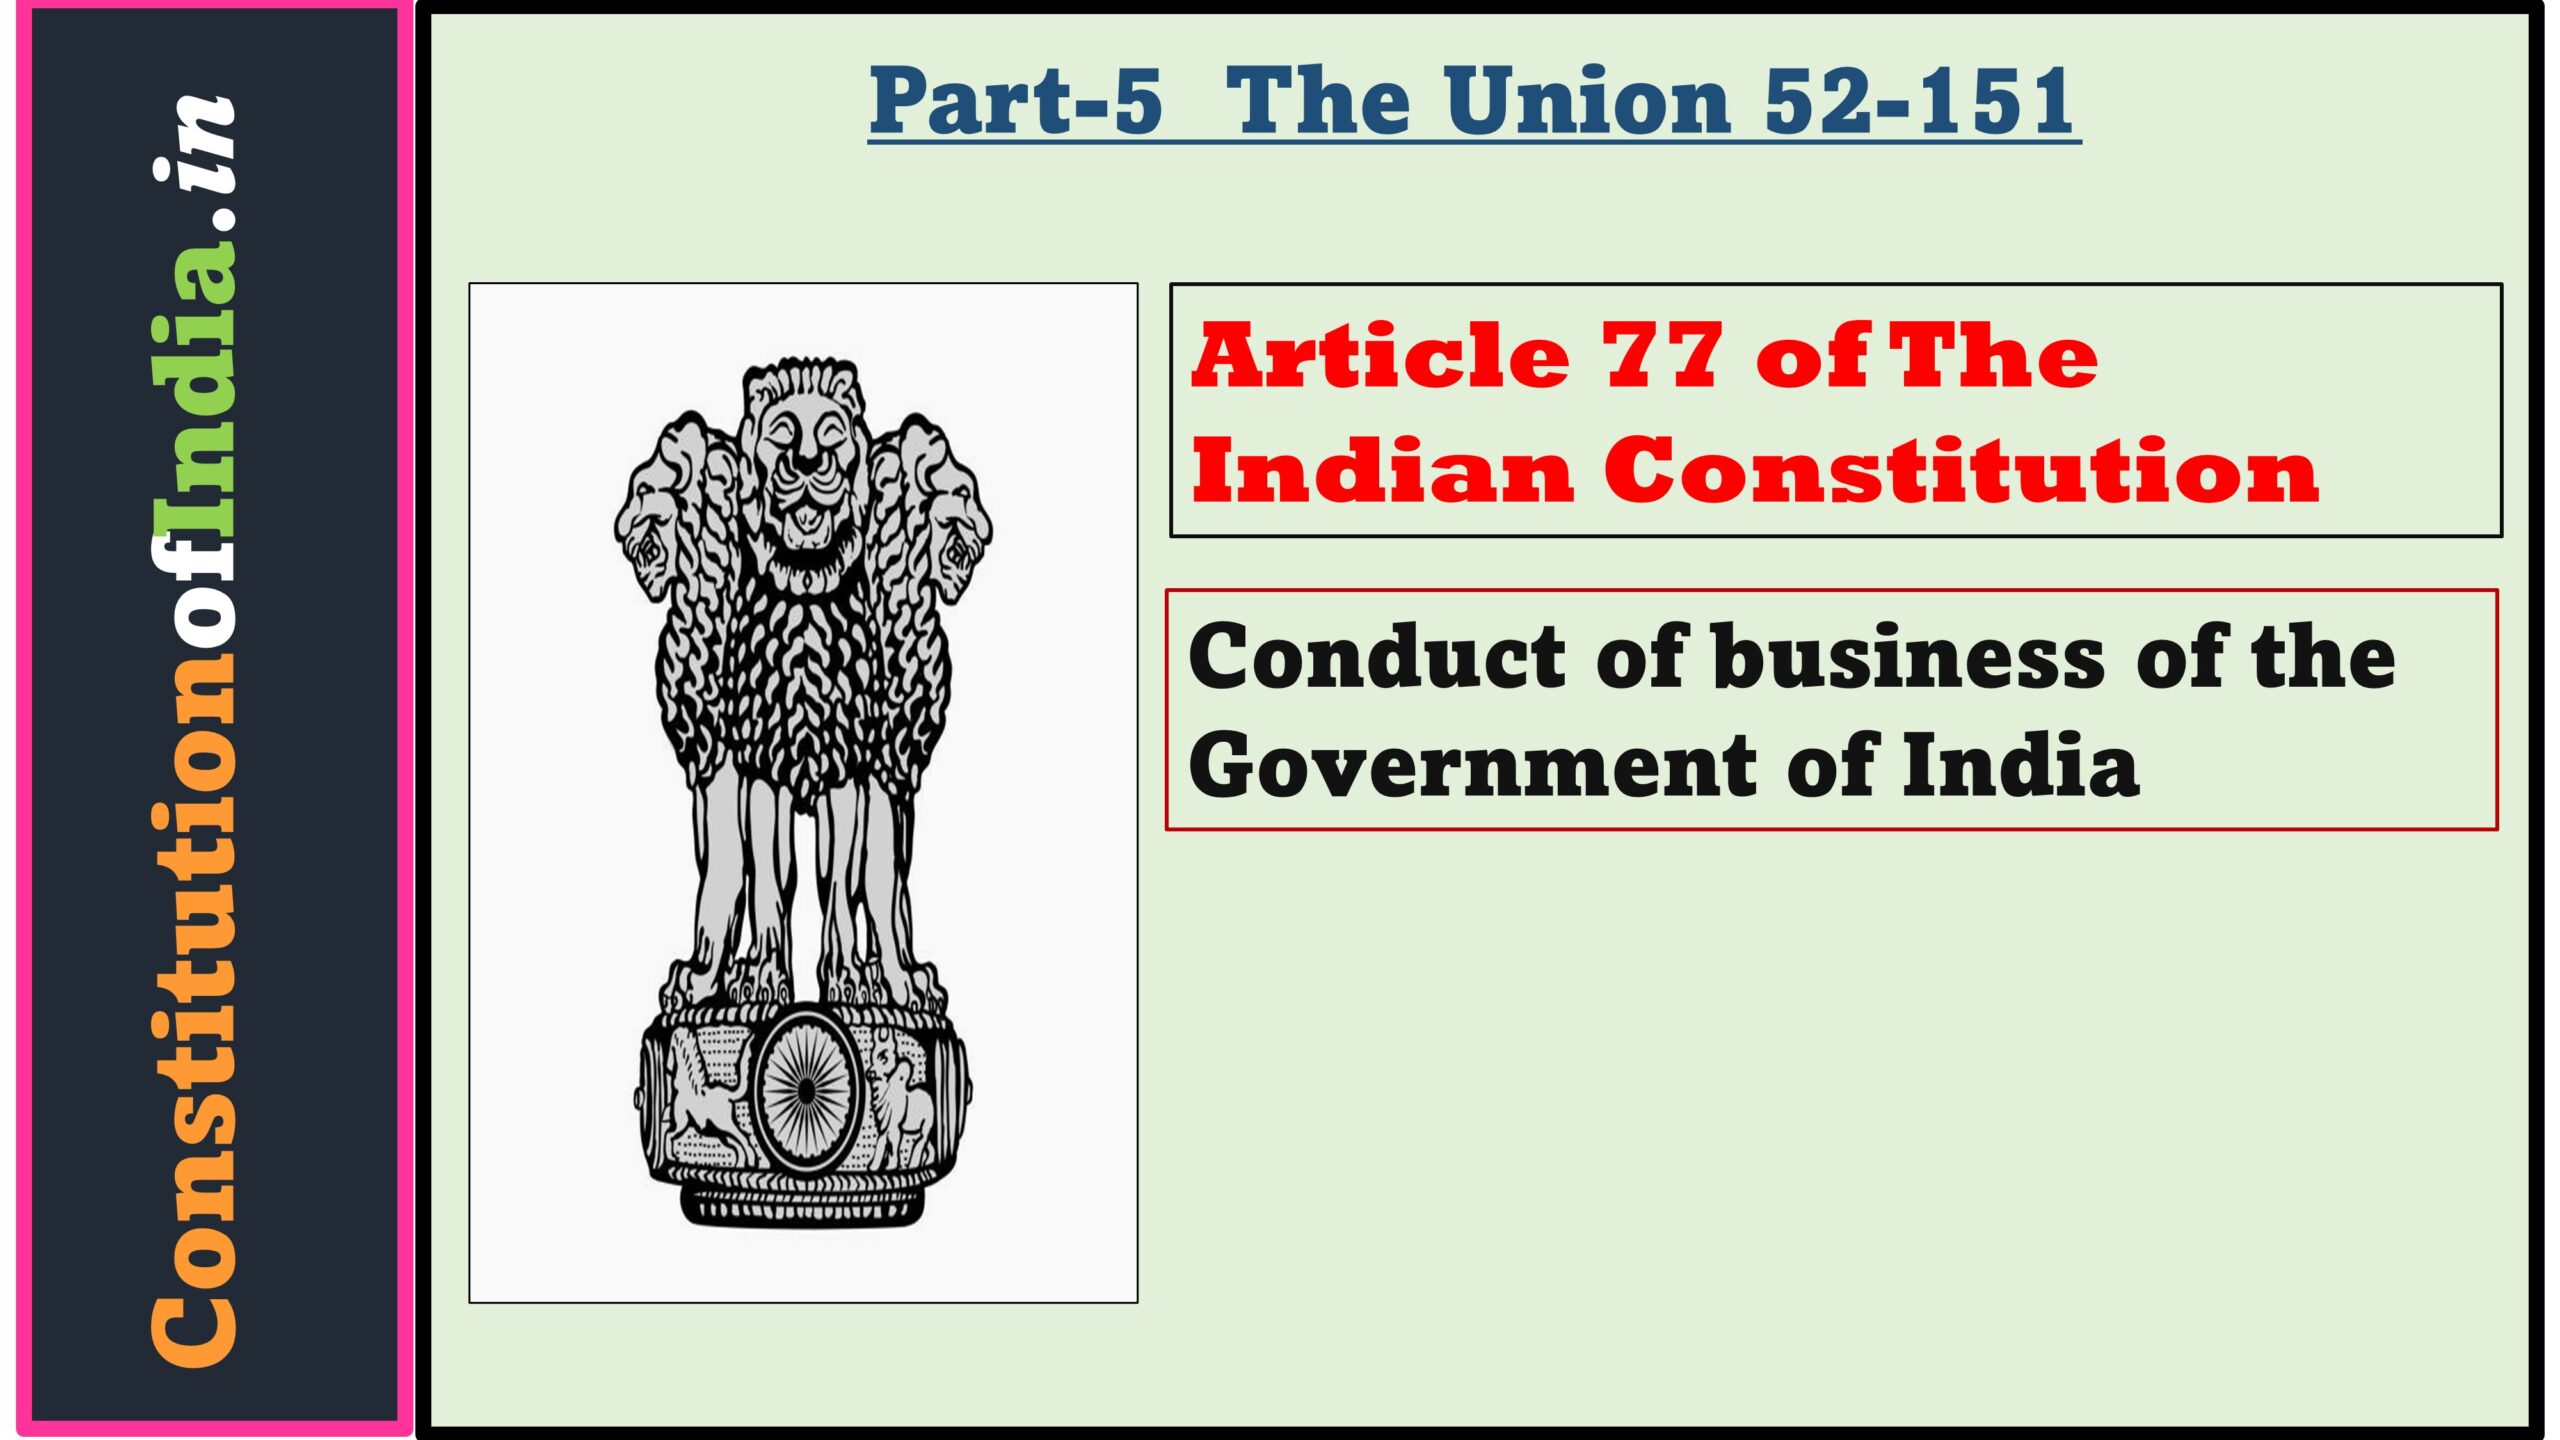 Article 77 of Indian Constitution